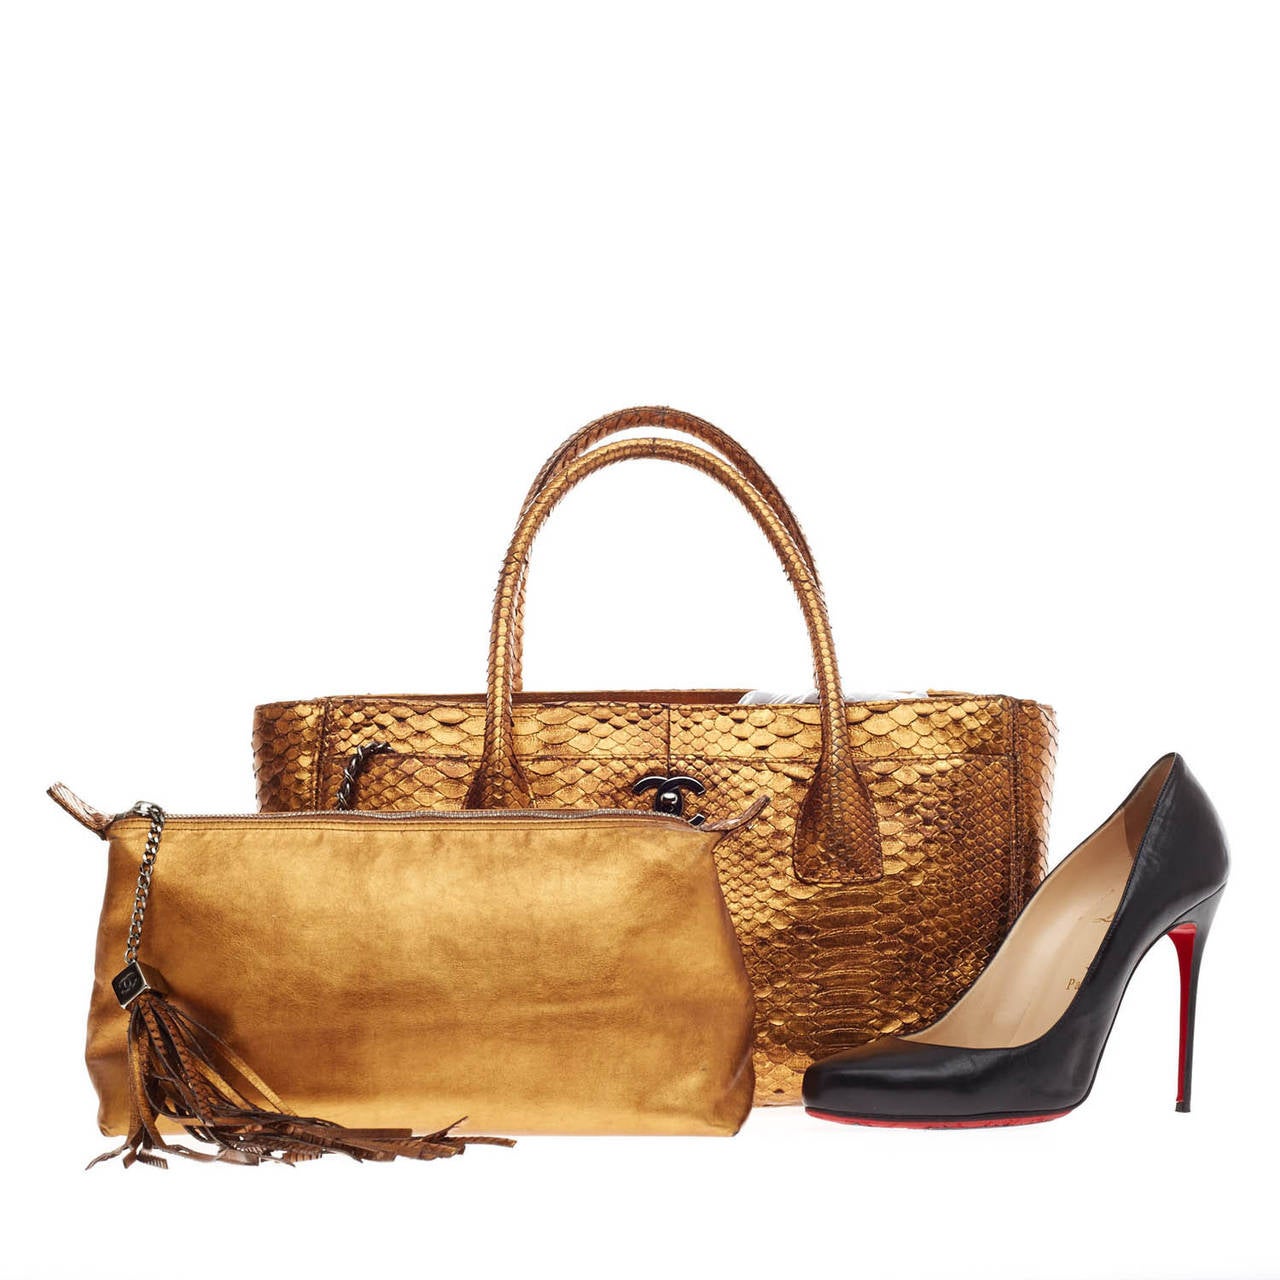 This authentic Chanel Cerf Tote Python in Medium is a luxurious and eye-catching statement piece. Crafted from sumptuous gold metallic python skin, this versatile tote features a matching gold removable interior pochette with tassel charm, long